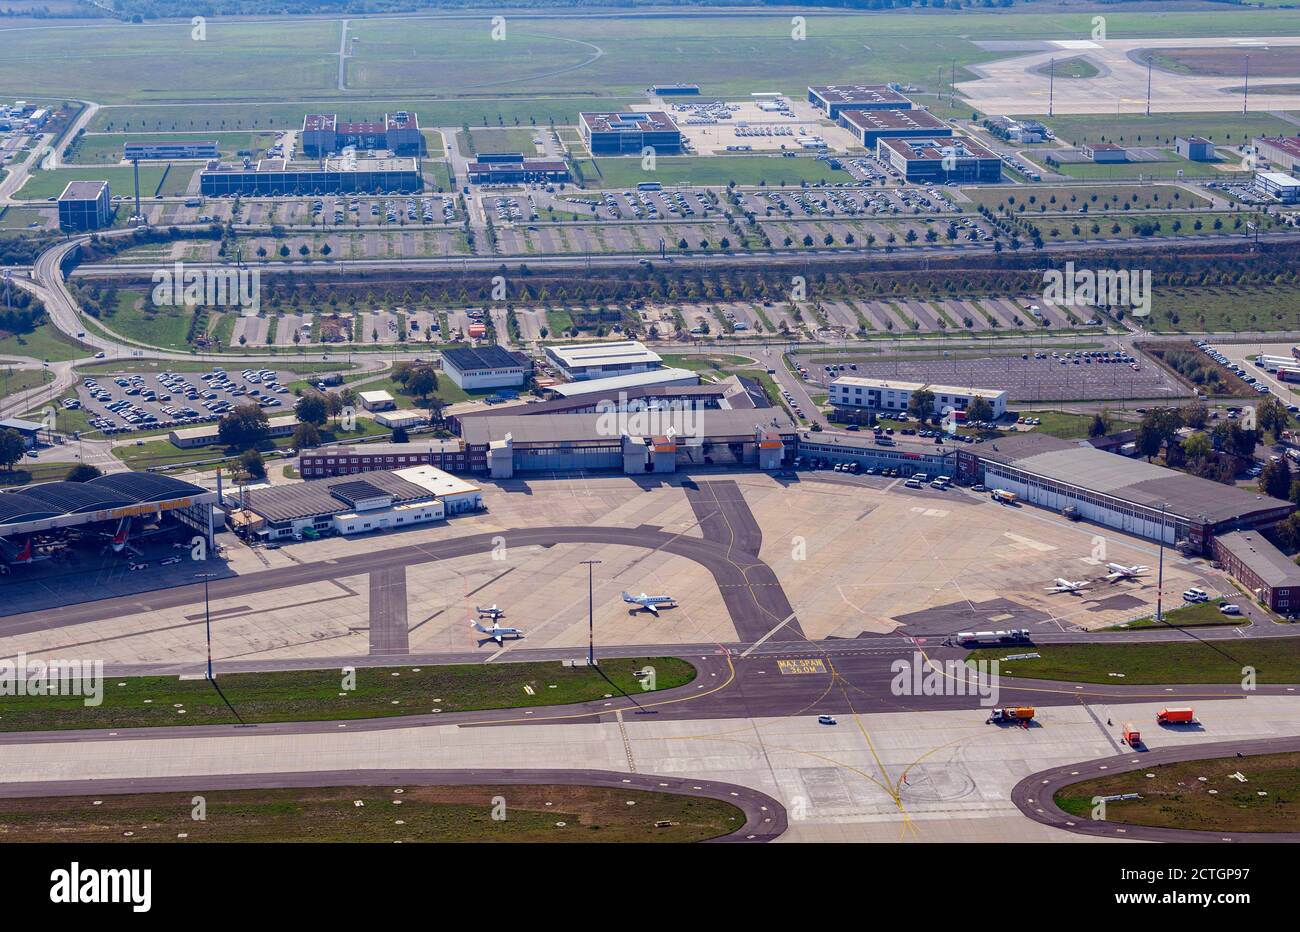 15 September 2020, Brandenburg, Schönefeld: Aerial view of the future airport Berlin Brandenburg 'Willy Brandt'. After a short transitional period, the capital city airport is to replace the current airports Tegel and Schönefeld. Photo: Soeren Stache/dpa-Zentralbild/ZB Stock Photo